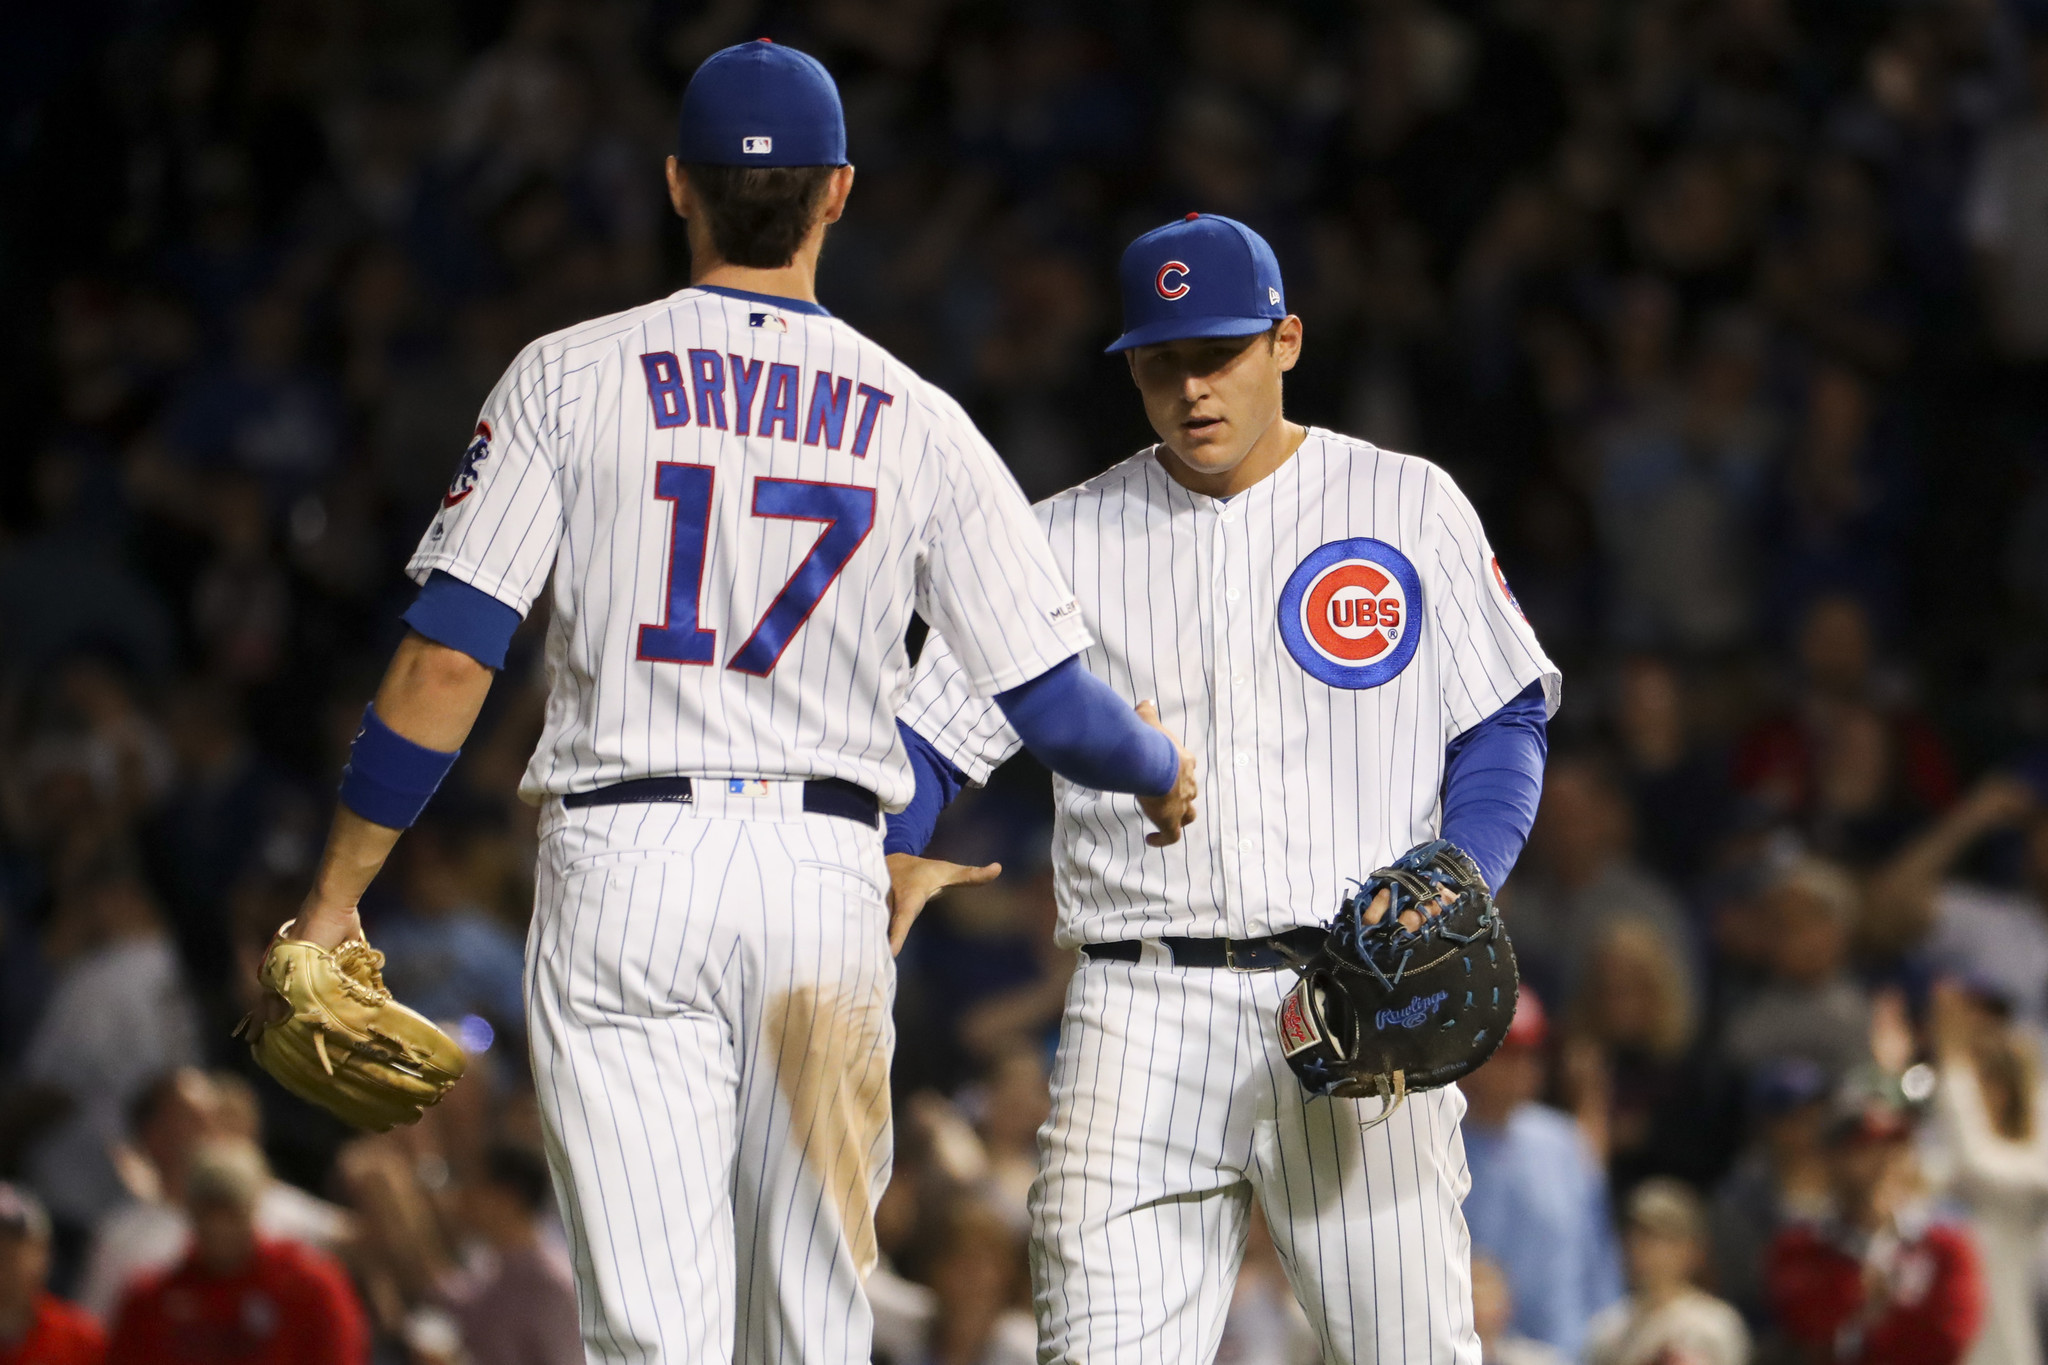 What's next for Bryzzo? Bryant shares funny vision of his future with Rizzo